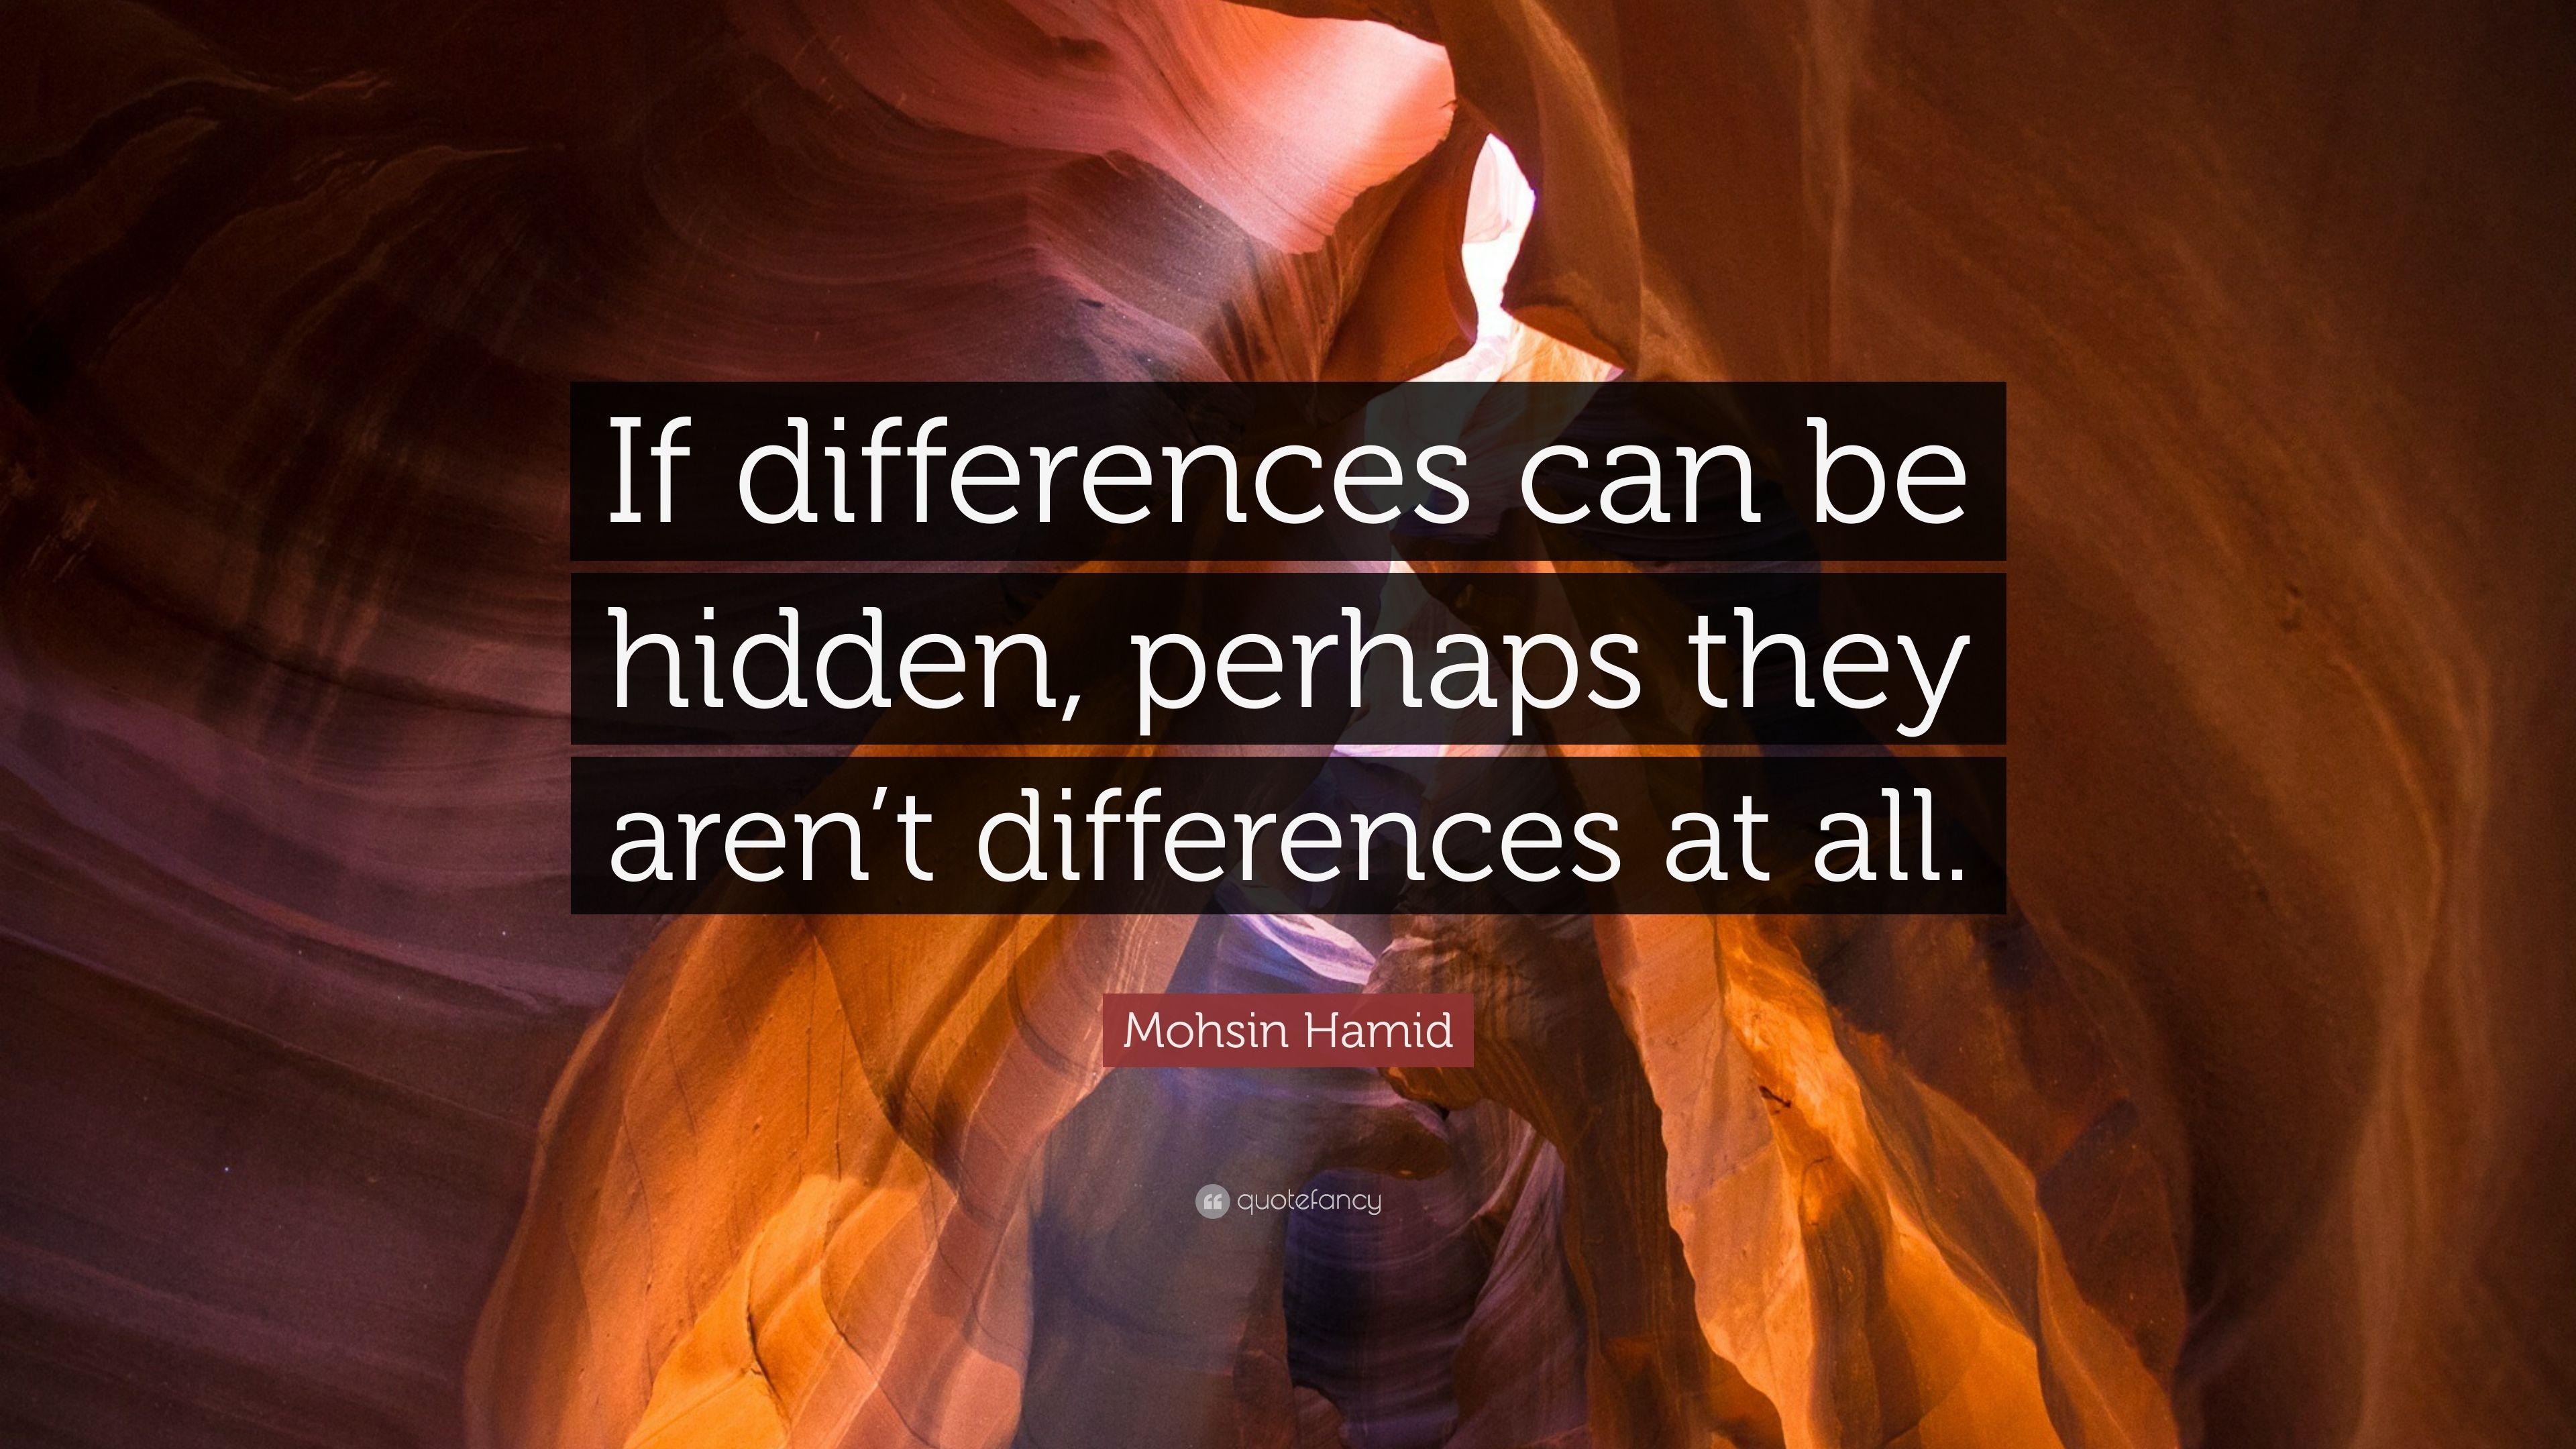 Mohsin Hamid Quote: “If differences can be hidden, perhaps they aren